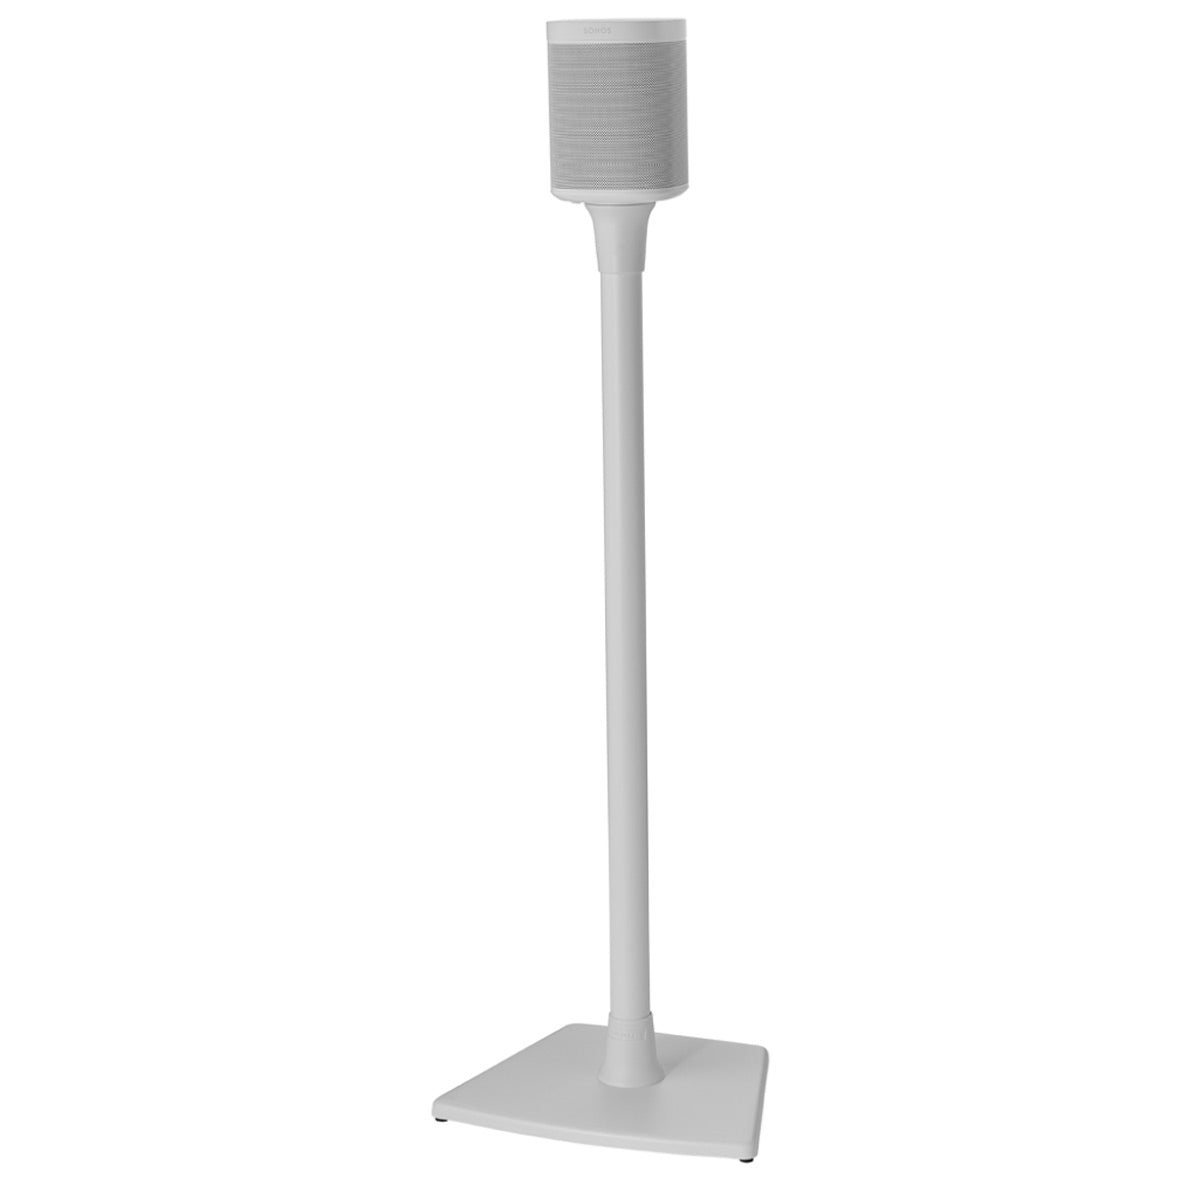 Sanus Fixed-Height Wireless Speaker Stands for Sonos ONE, PLAY:1, and PLAY:3 - Pair (White)